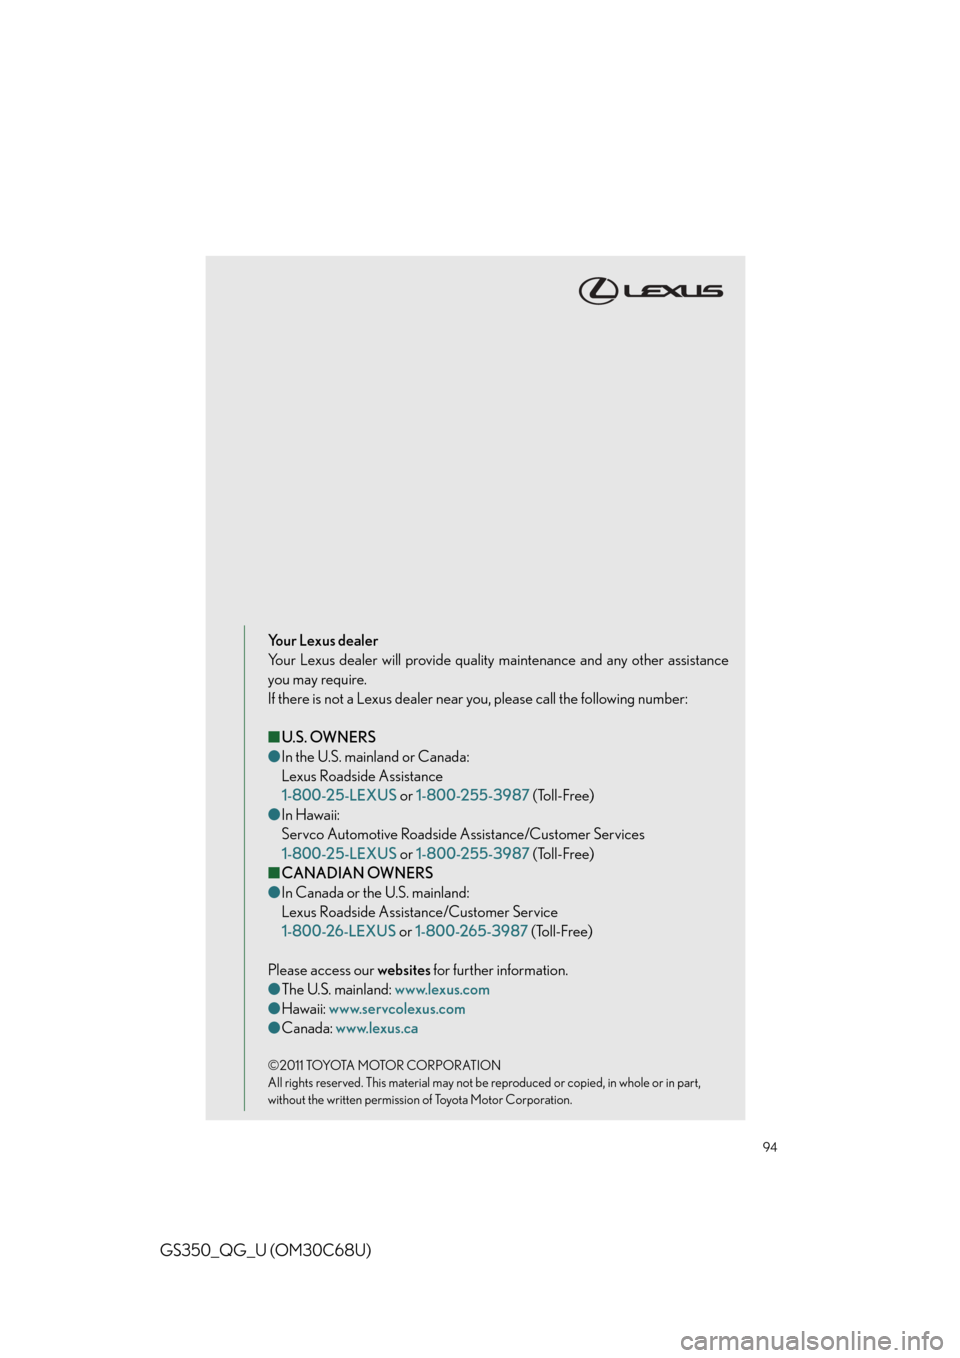 Lexus GS350 2013  Do-it-yourself maintenance / LEXUS 2013 GS350 QUICK GUIDE OWNERS MANUAL (OM30C68U) 94
GS350_QG_U (OM30C68U)
Your Lexus dealer
Your Lexus dealer will provide quality maintenance and any other assistance 
you may require.
If there is not a Lexus dealer near you, please call the follow